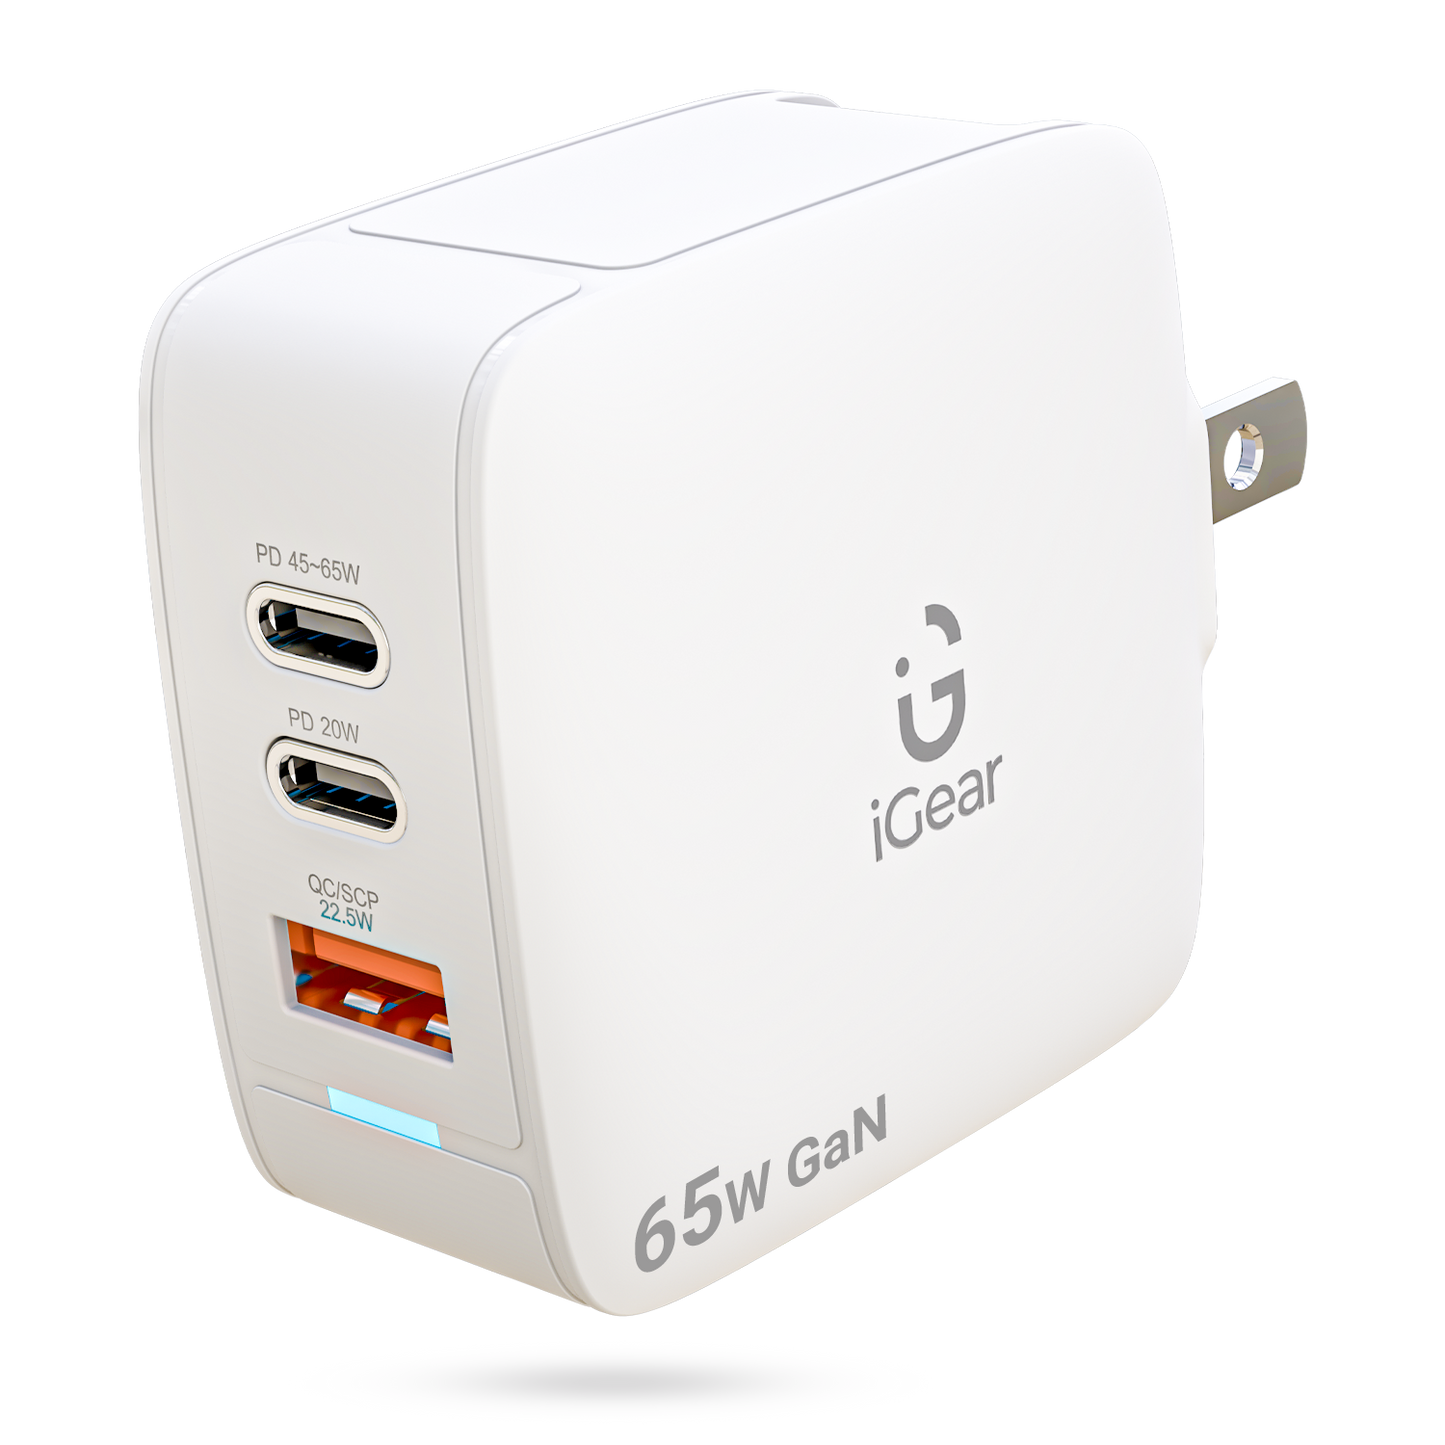 Core 65W GaN Charger